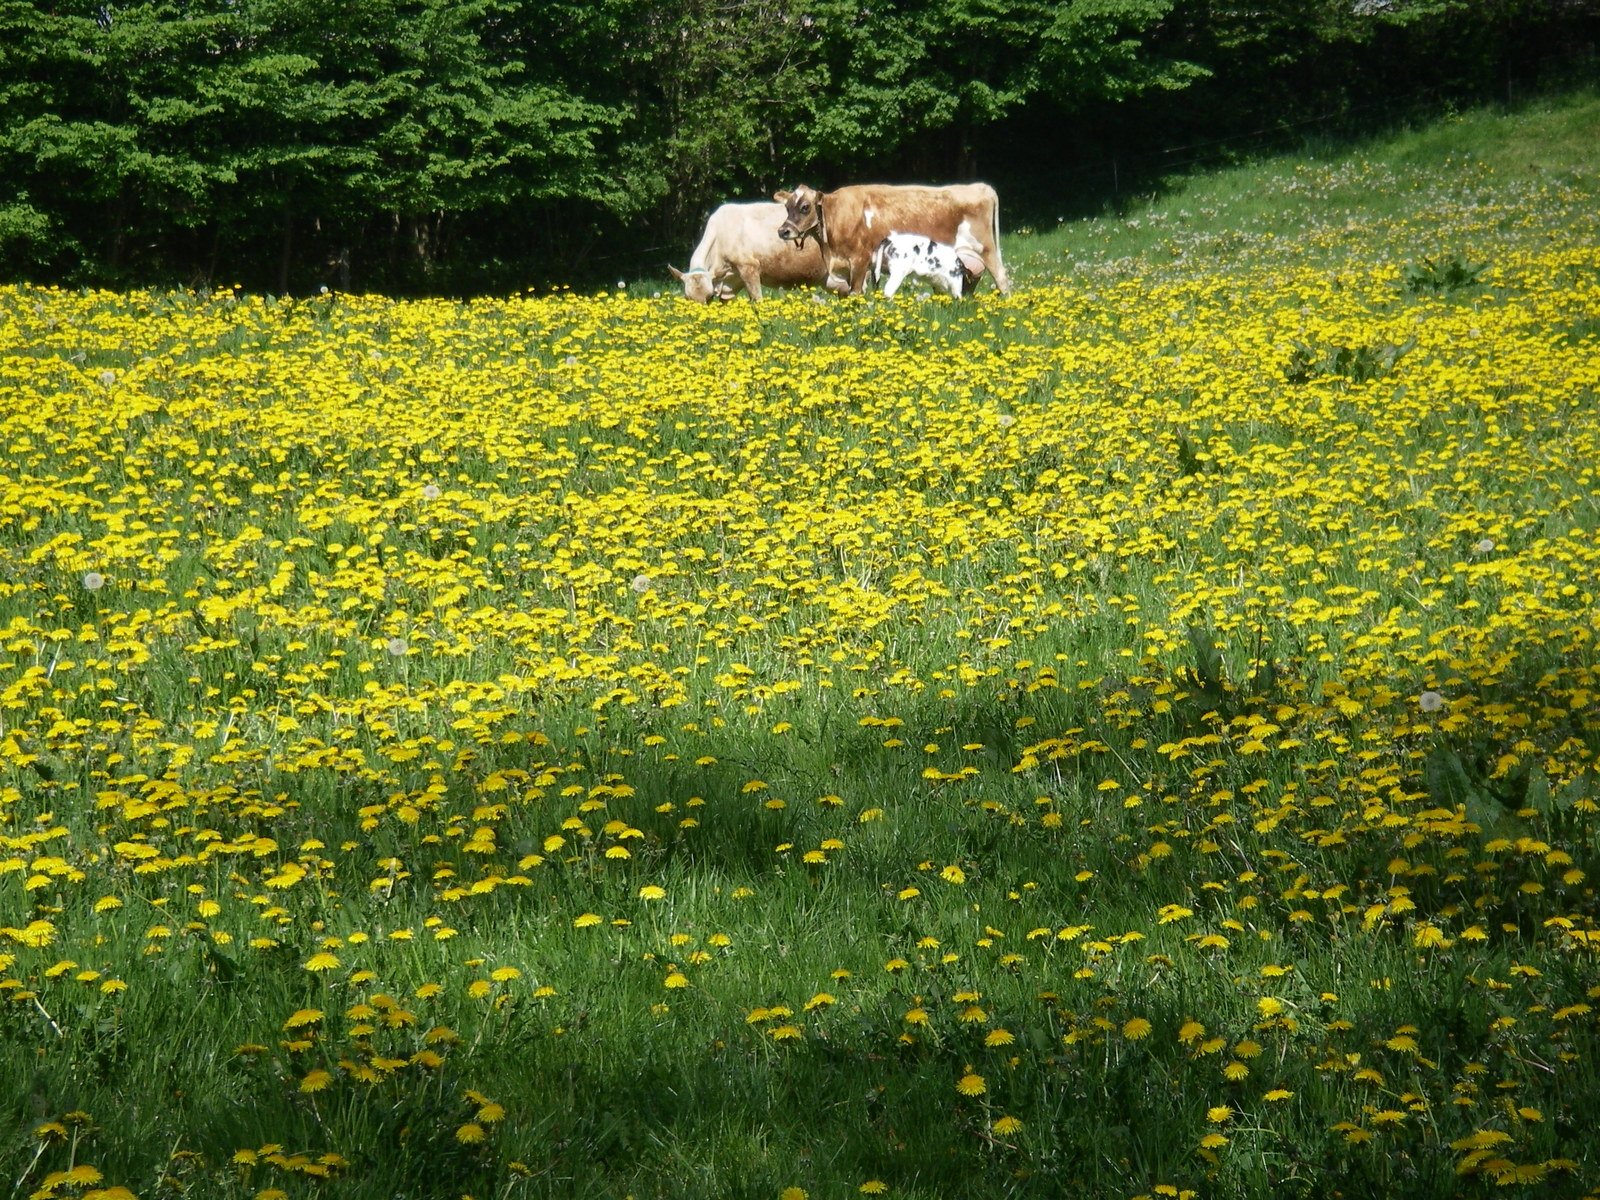 two cows are standing in a flowery field